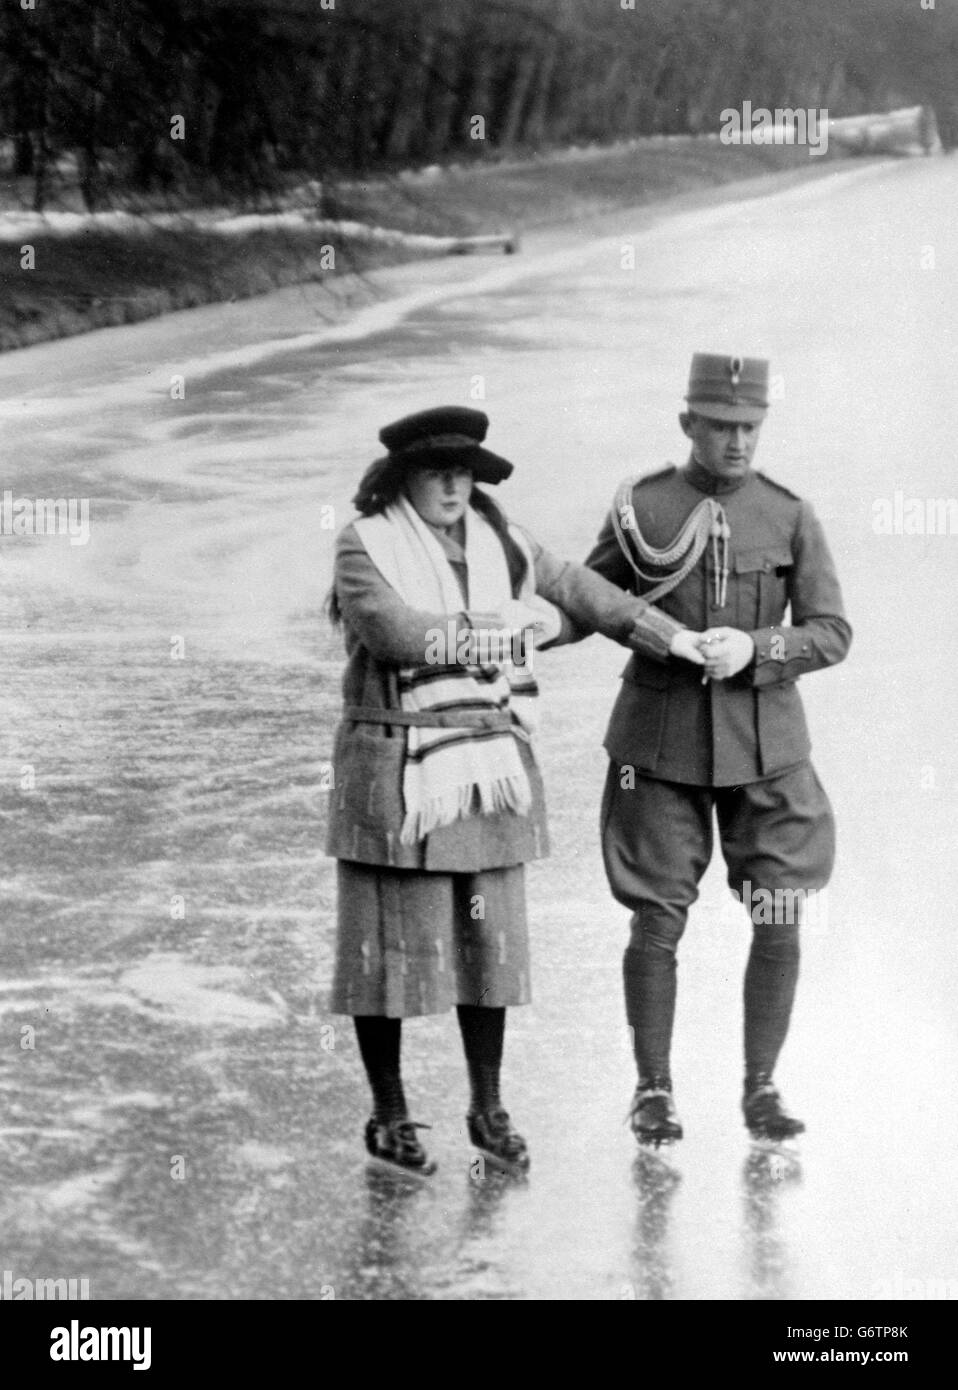 Princess Juliana - the daughter of Queen Wilhelmina - skating on the ice behind the Royal Palace at the Hague with one of the Queen of Holland's adjutants. Stock Photo